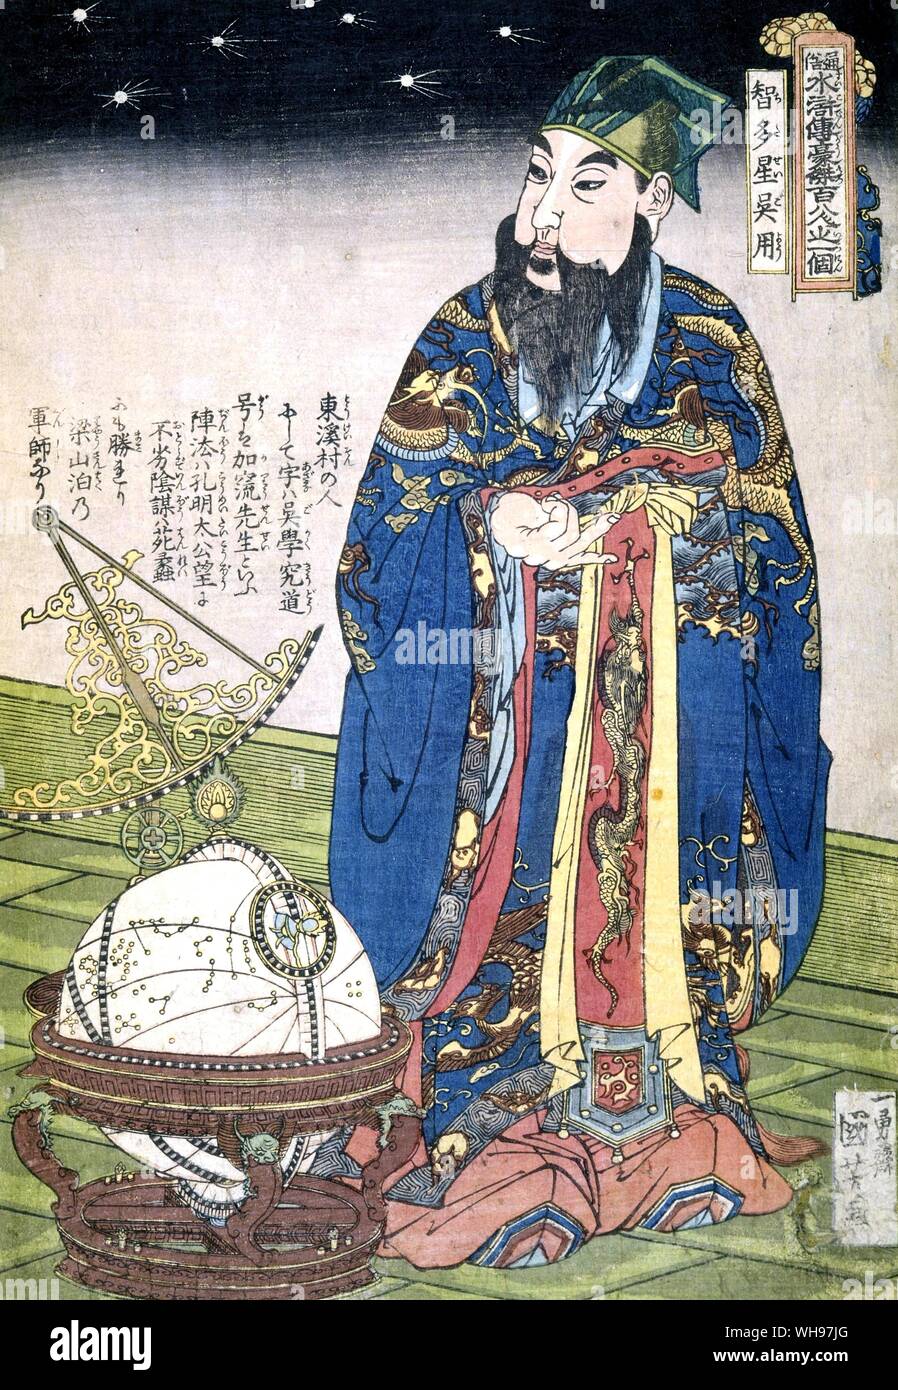 Father Ferdinand Verbiest dressed as a Chinese astrologer a Japanese view illustrating the widespread impression the Jesuits made in the East Stock Photo